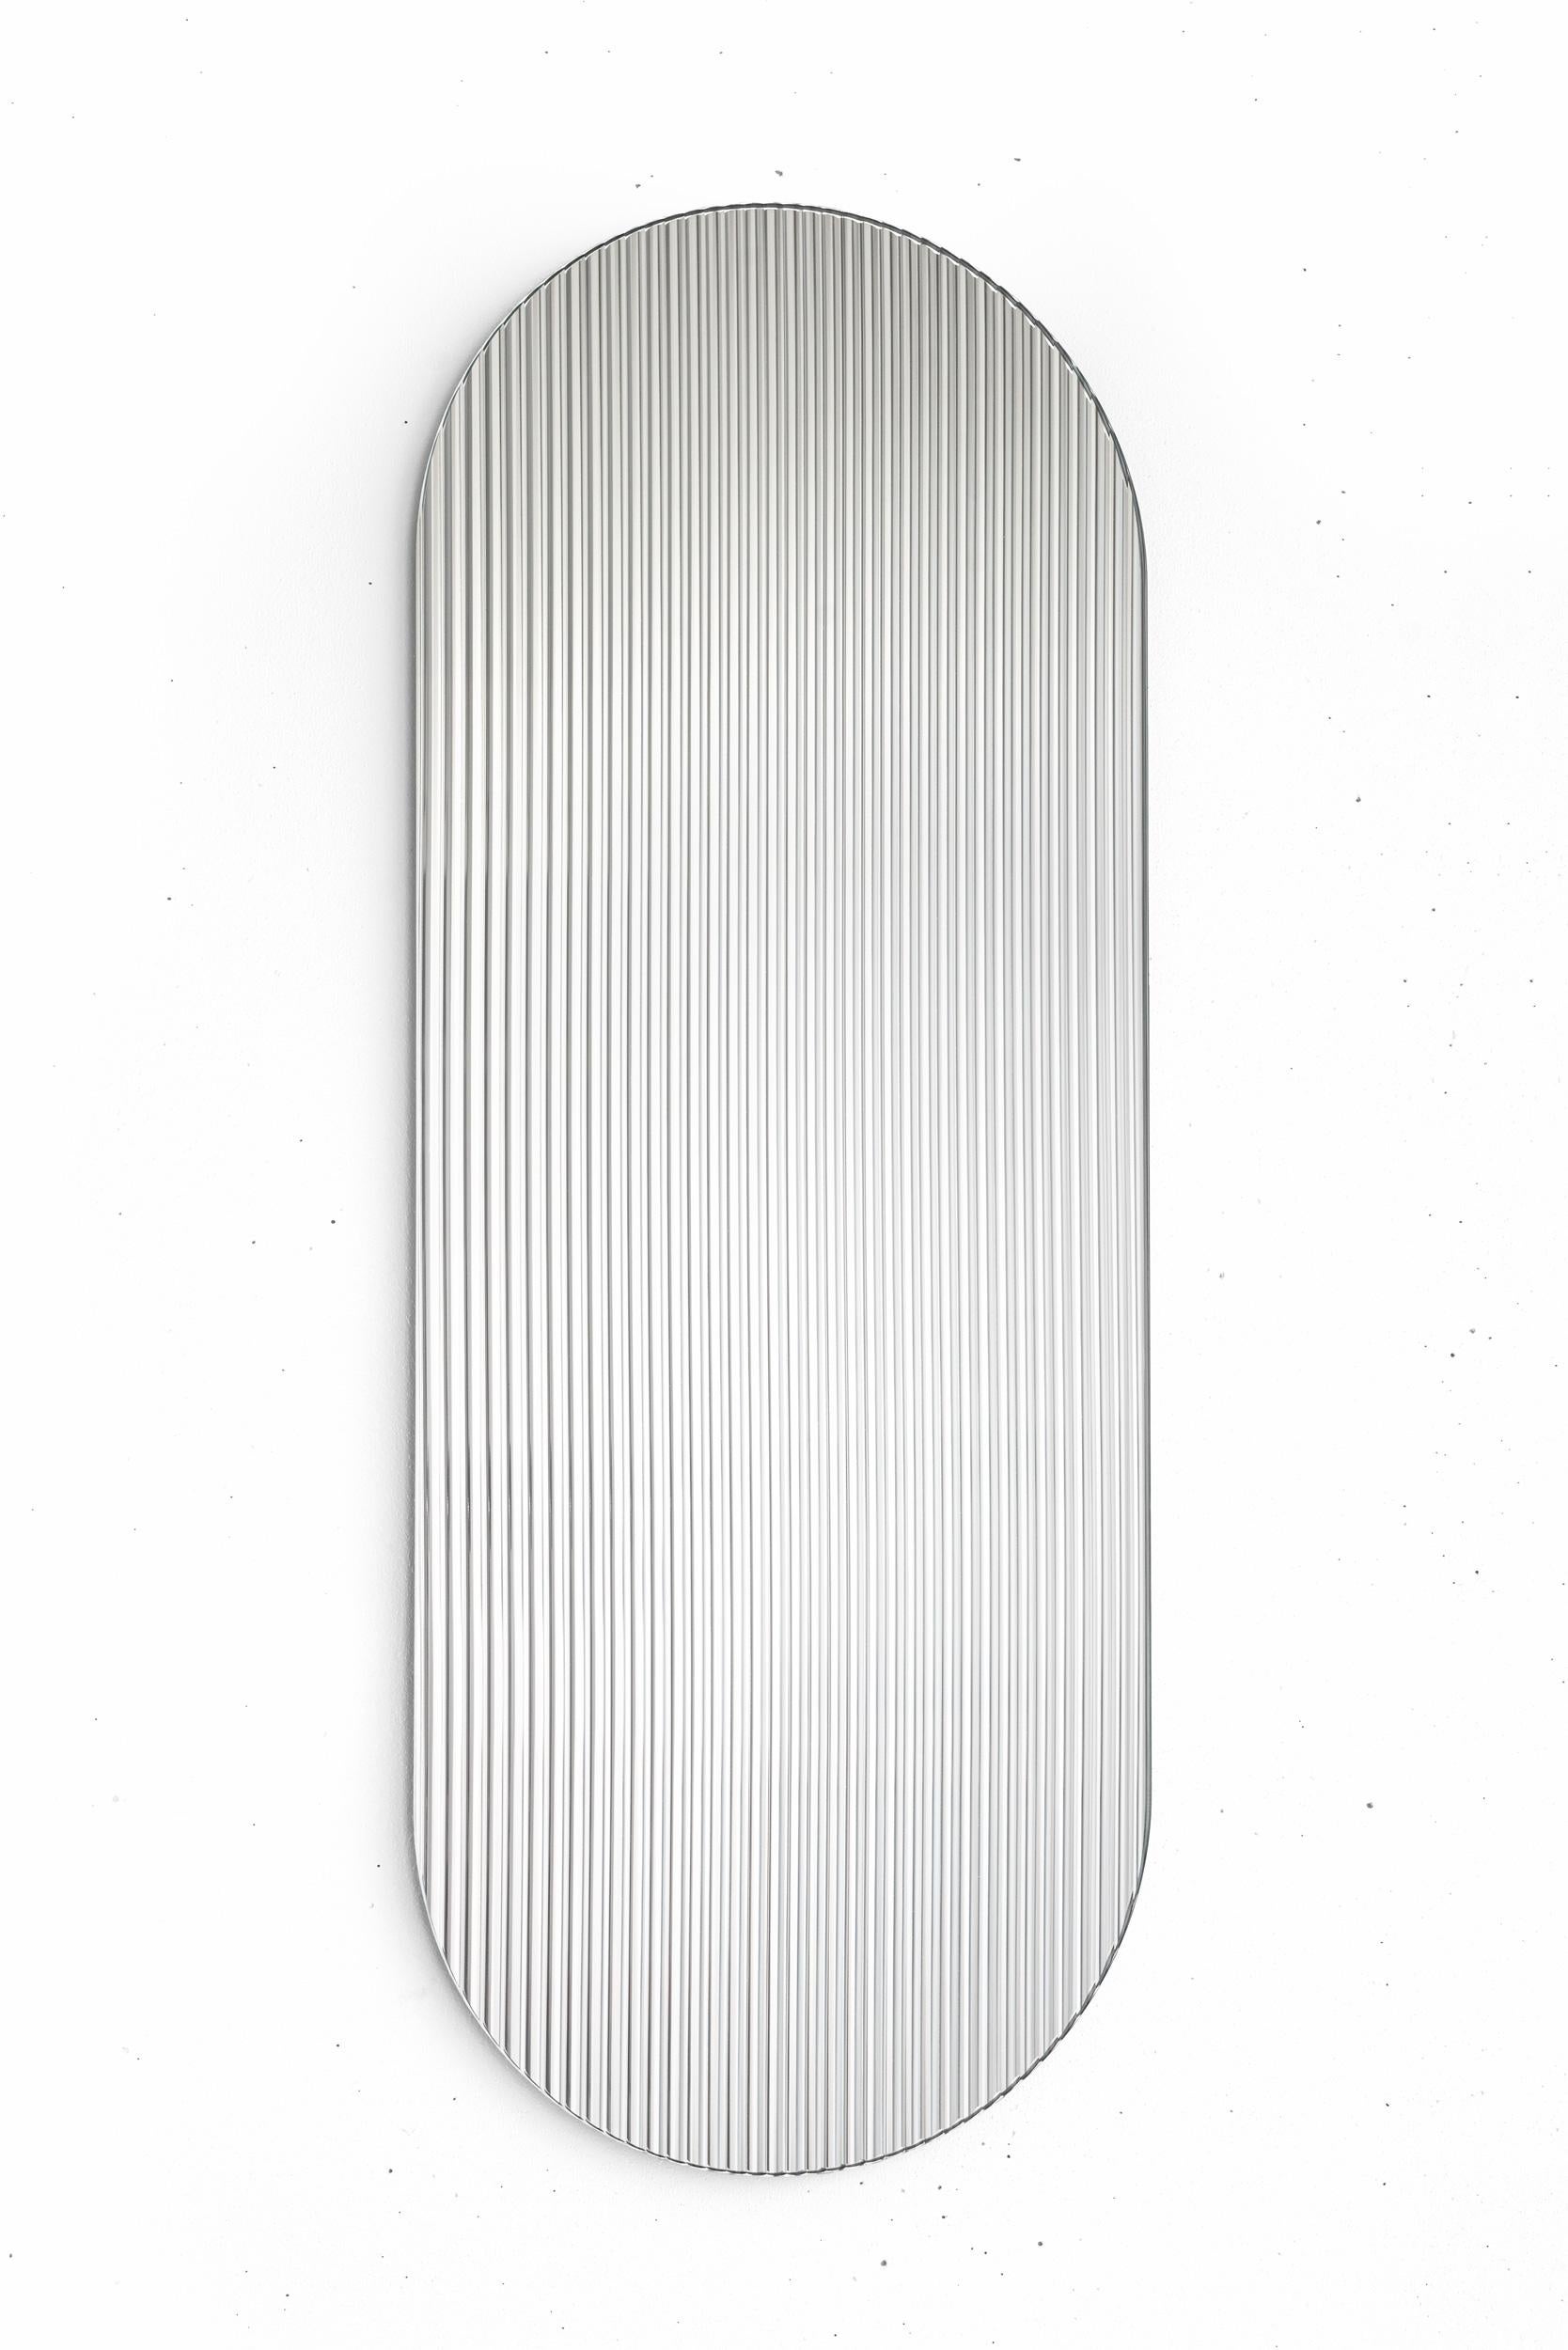 Other Decorative art silver reflective wall panel, Metal Shift, Sterling, Rive Roshan For Sale